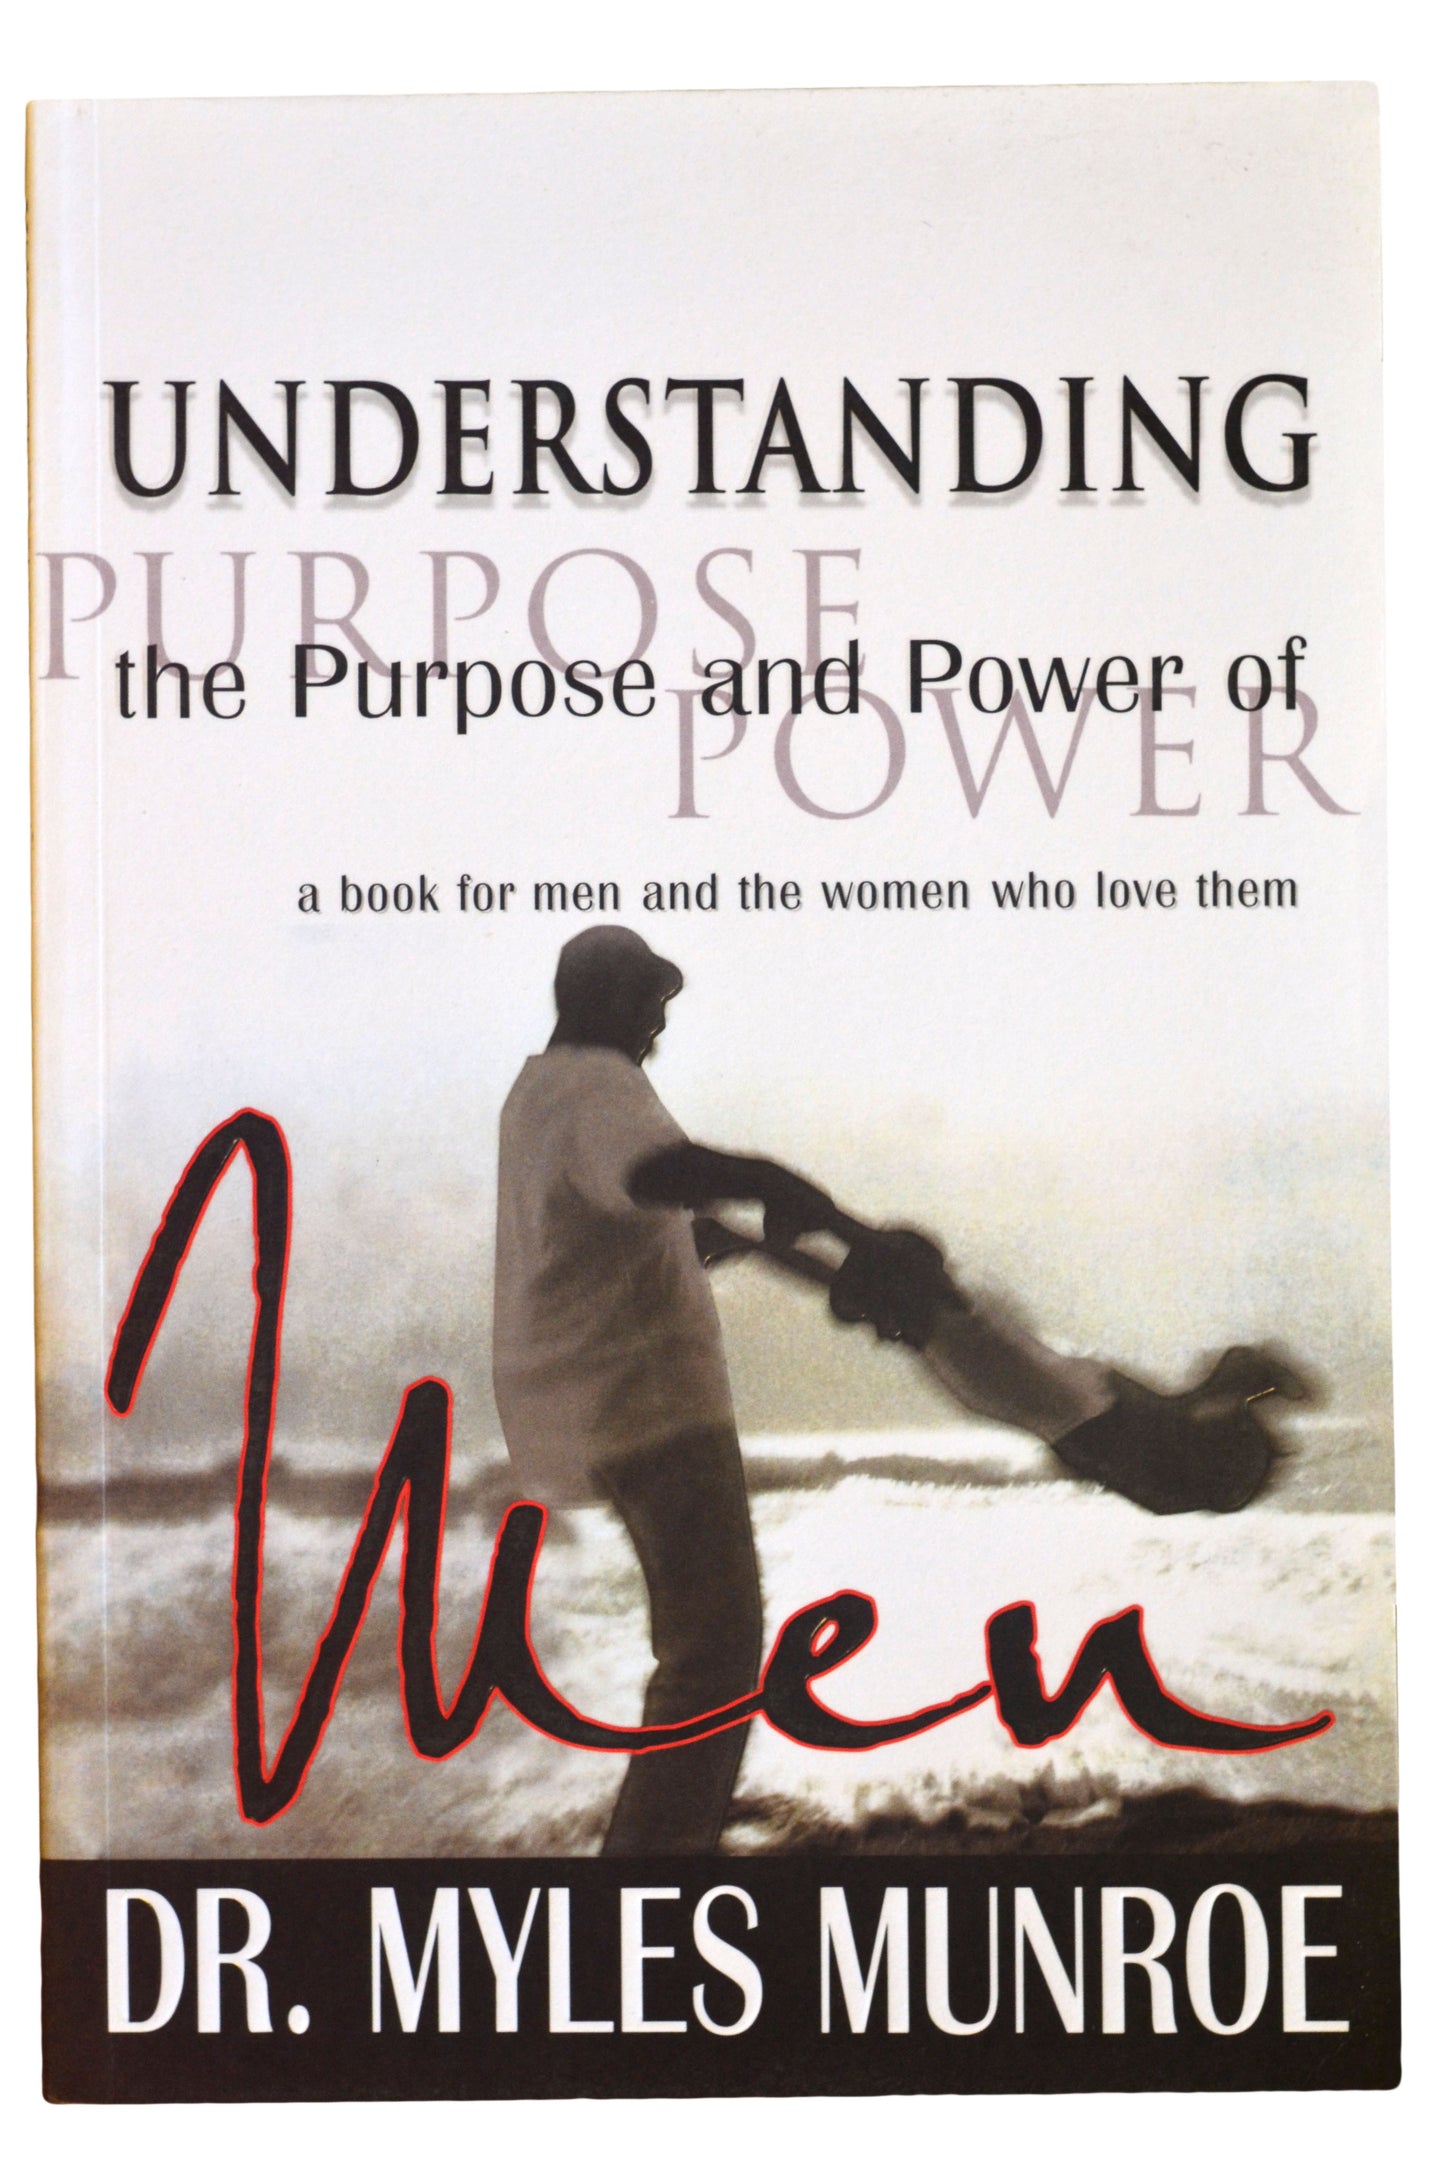 UNDERSTANDING THE PURPOSE AND THE POWER OF MEN